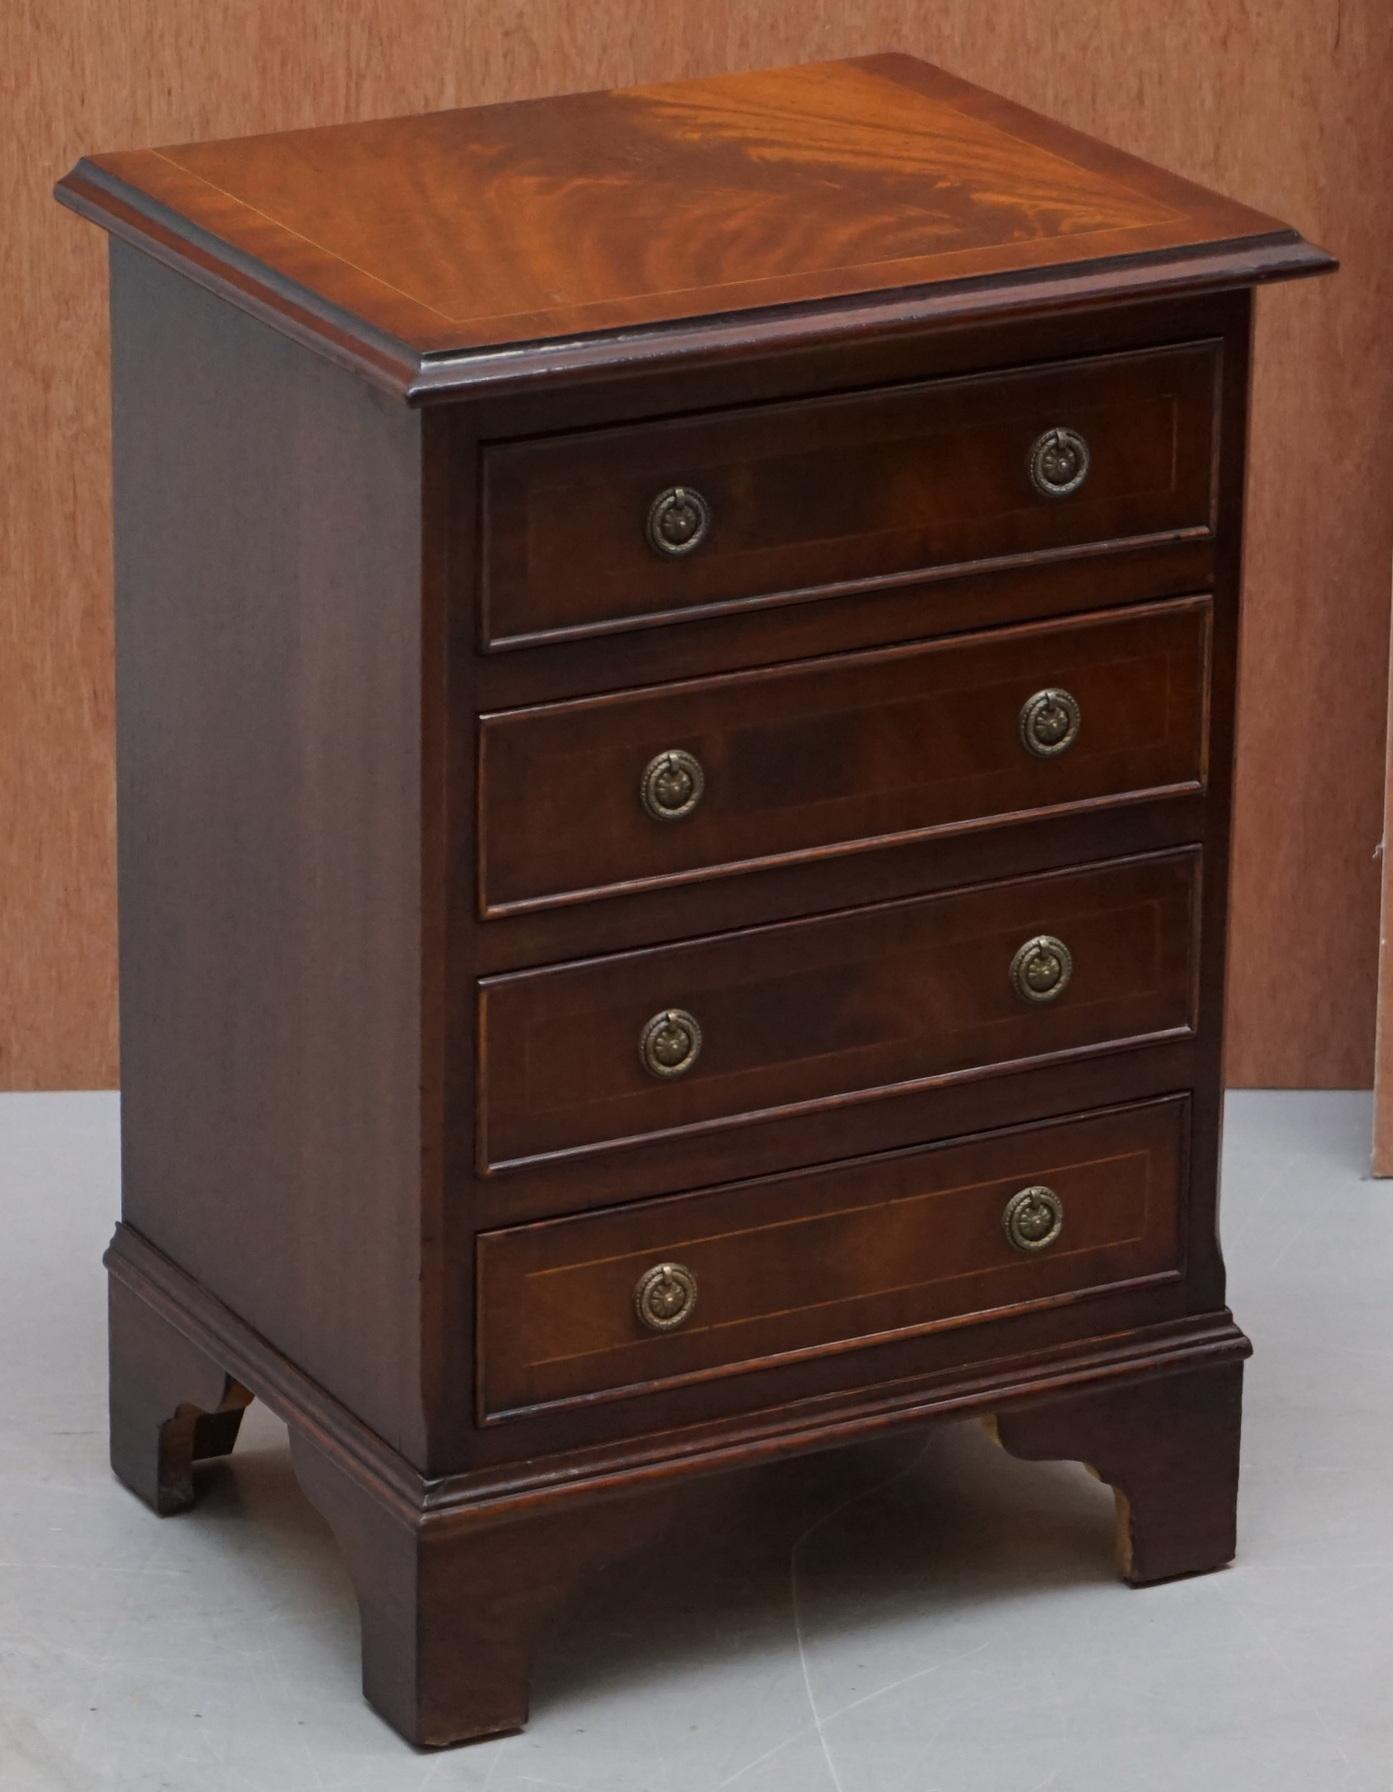 We are delighted to offer for sale this lovely pair of bedside or lamp table sized chests of drawers in flamed mahogany

A versatile and well made pair, they have a lovely flamed mahogany finish with early Georgian style handles

We have cleaned